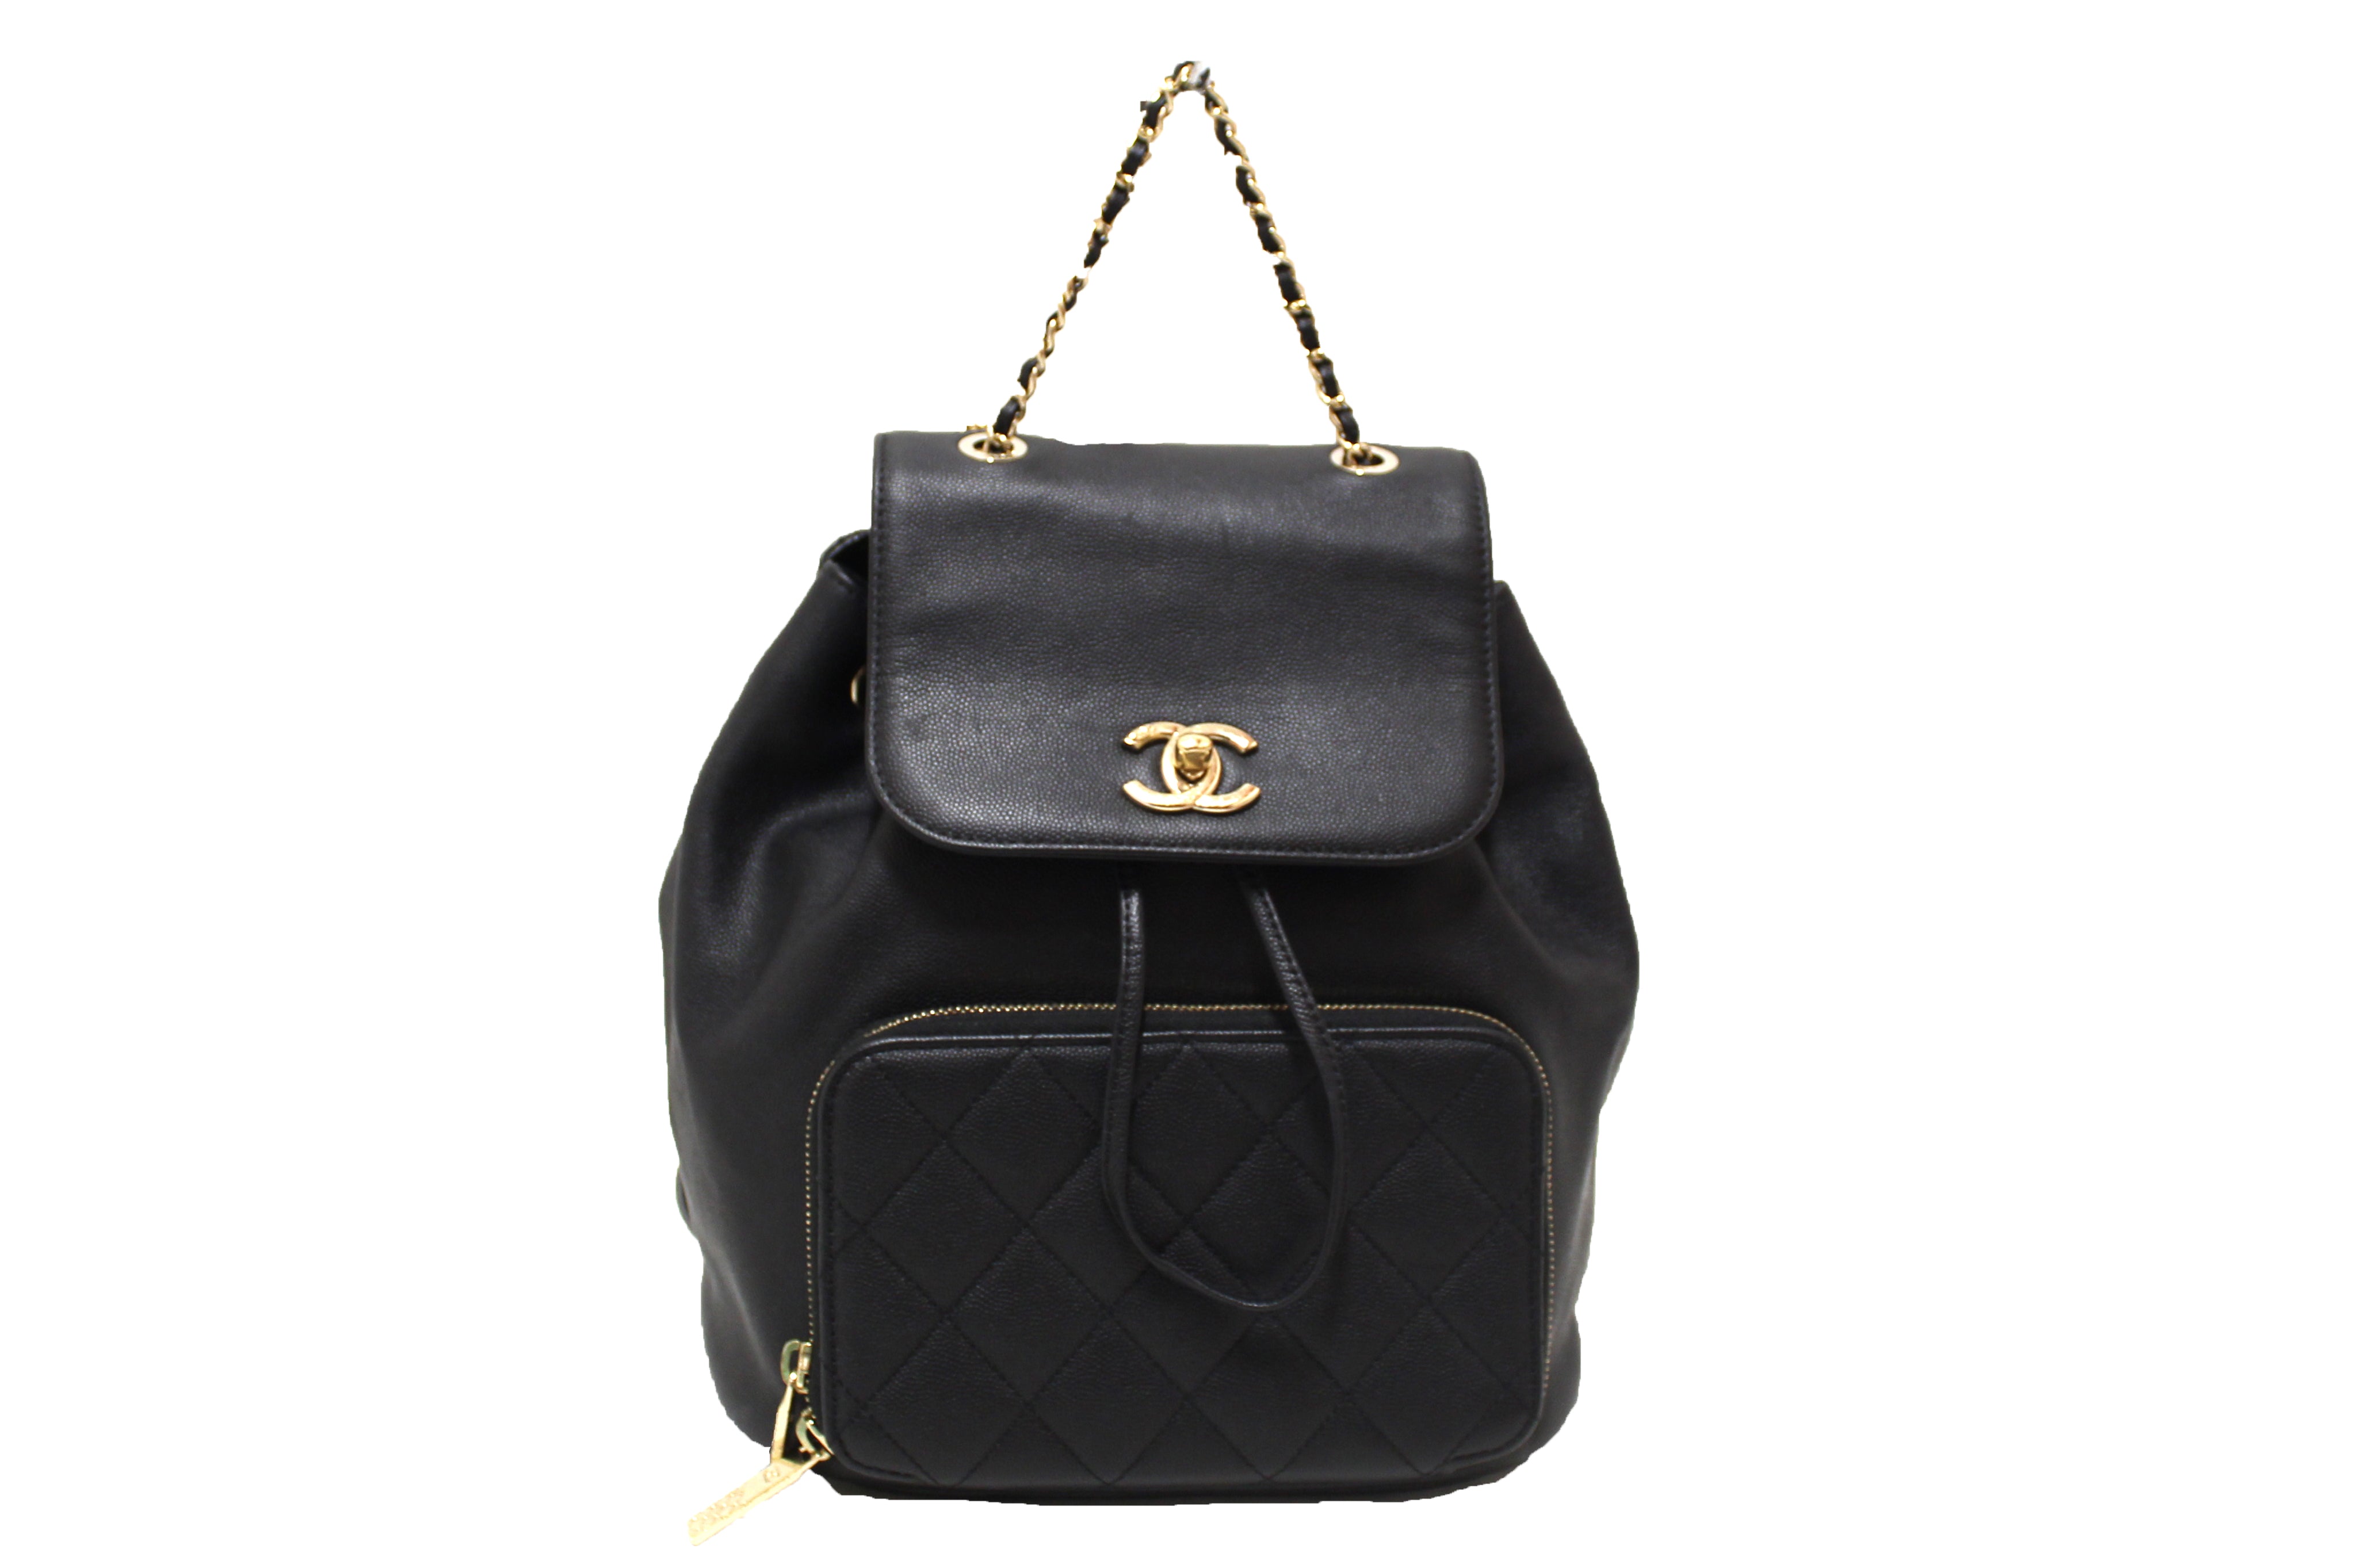 Chanel Business Affinity Tote Bag, Black Caviar Leather, Gold Hardware,  Preowned in Dustbag